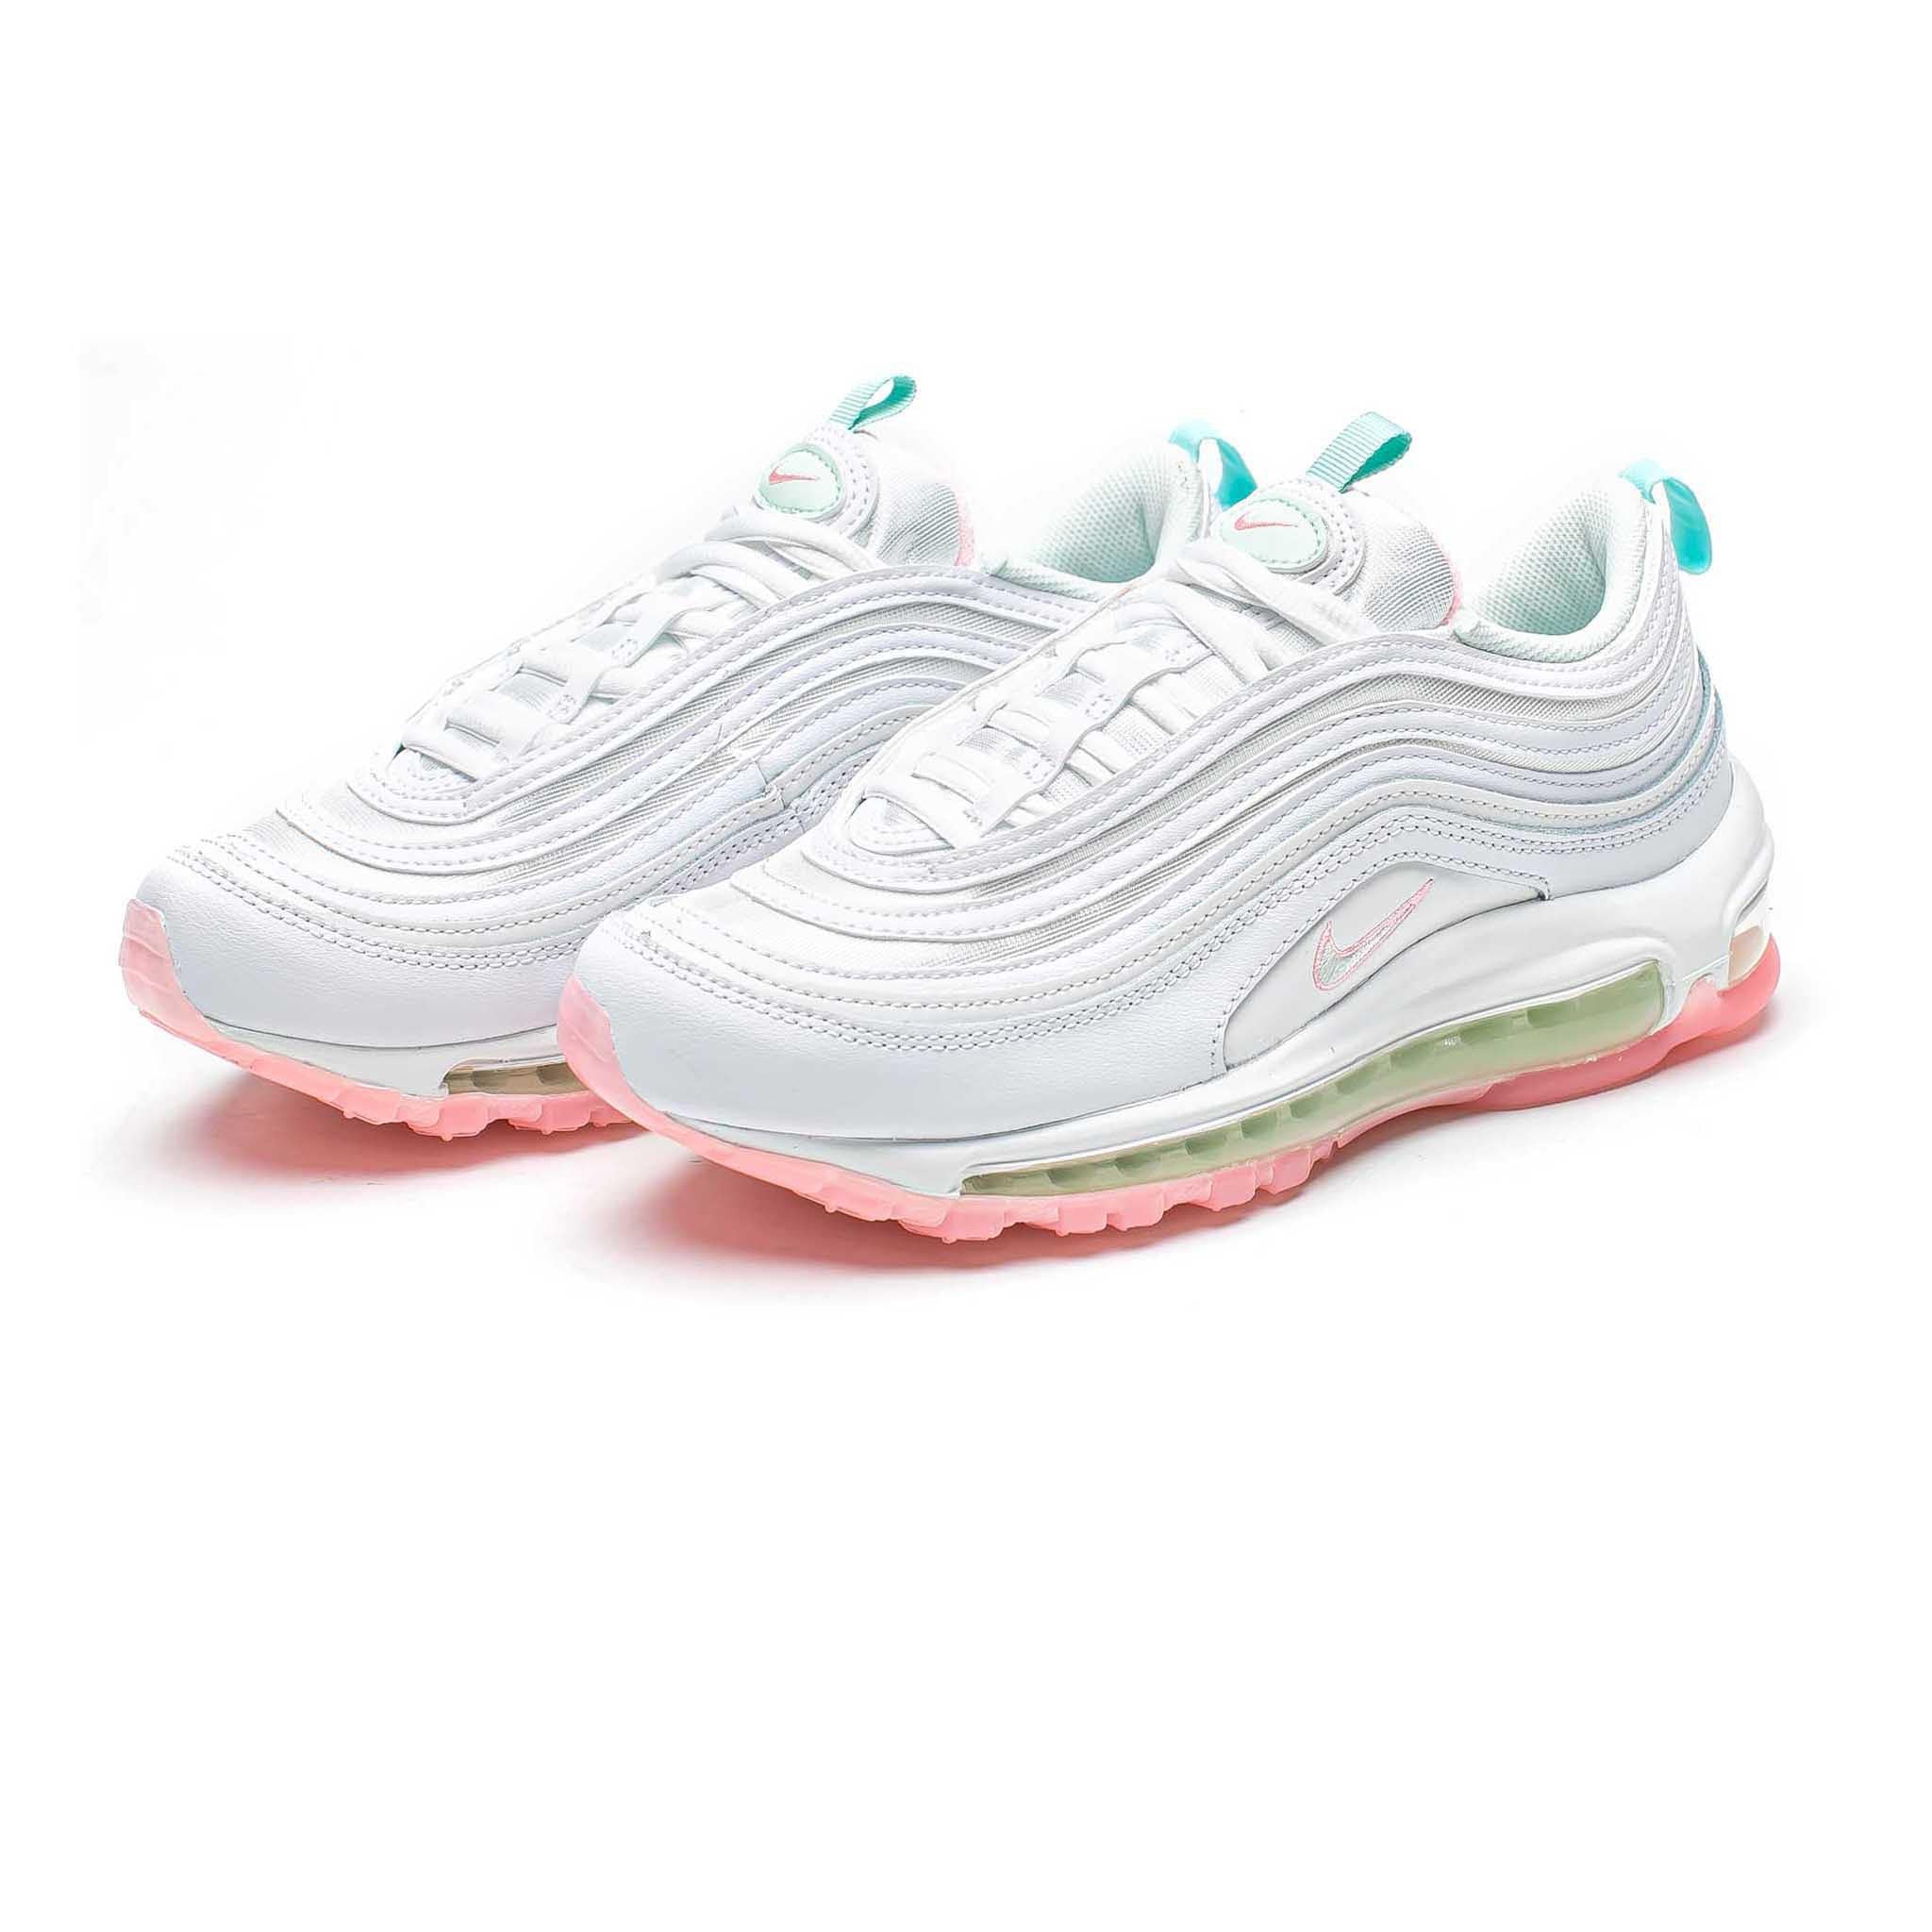 Nike Air Max 97 'White/Barely Green'